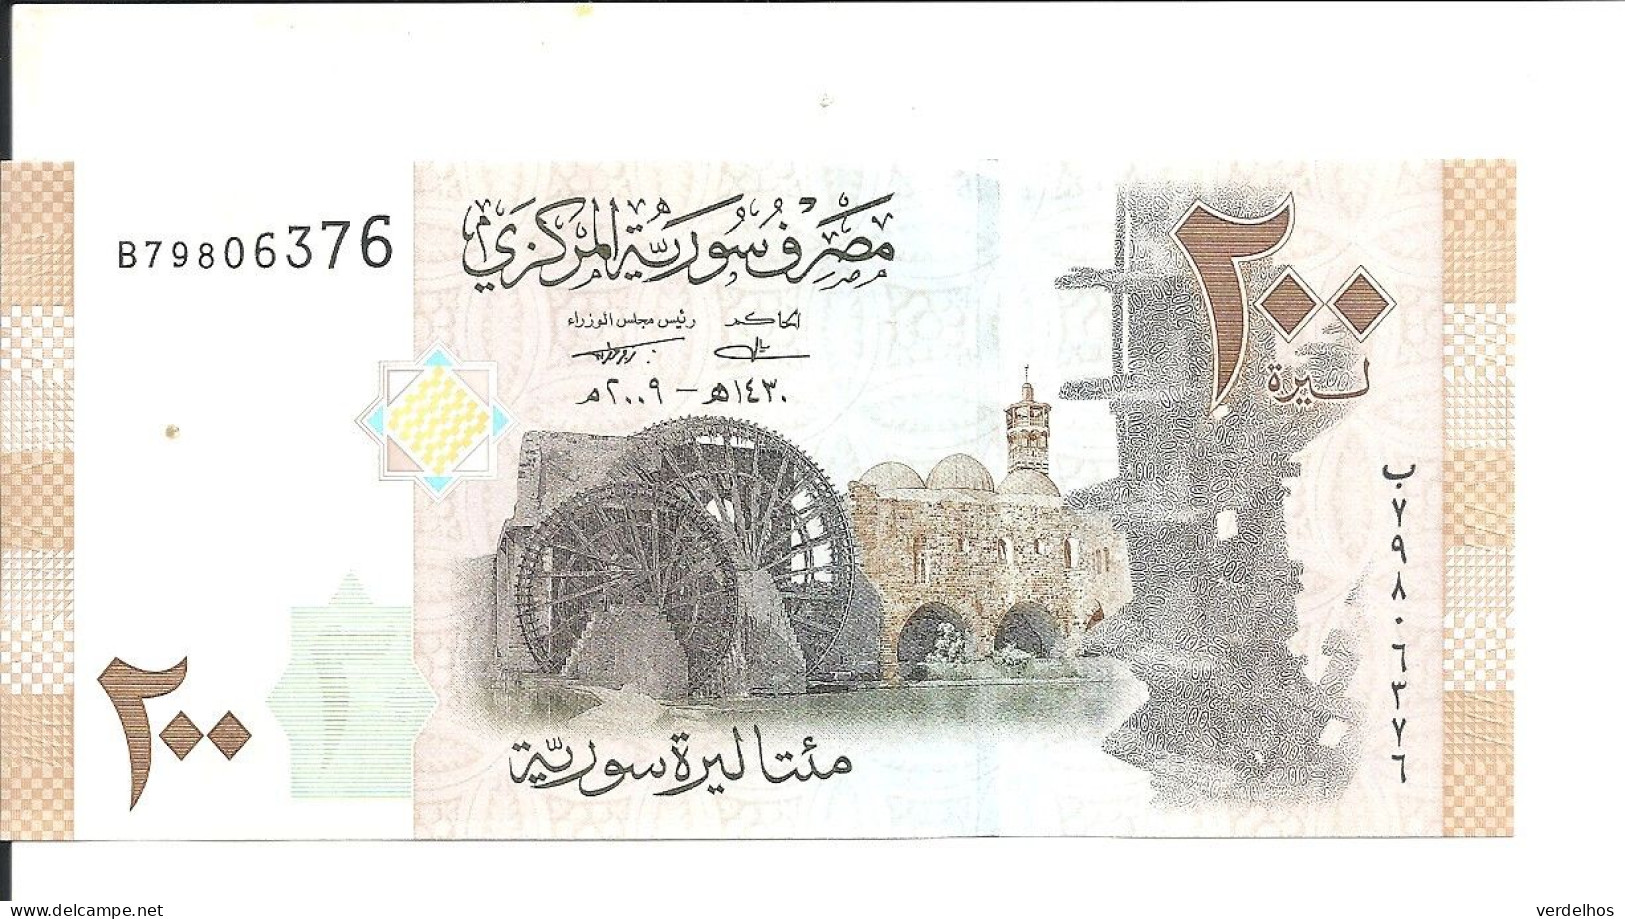 SYRIE 200 POUNDS 2009 UNC P 114 - Syrie